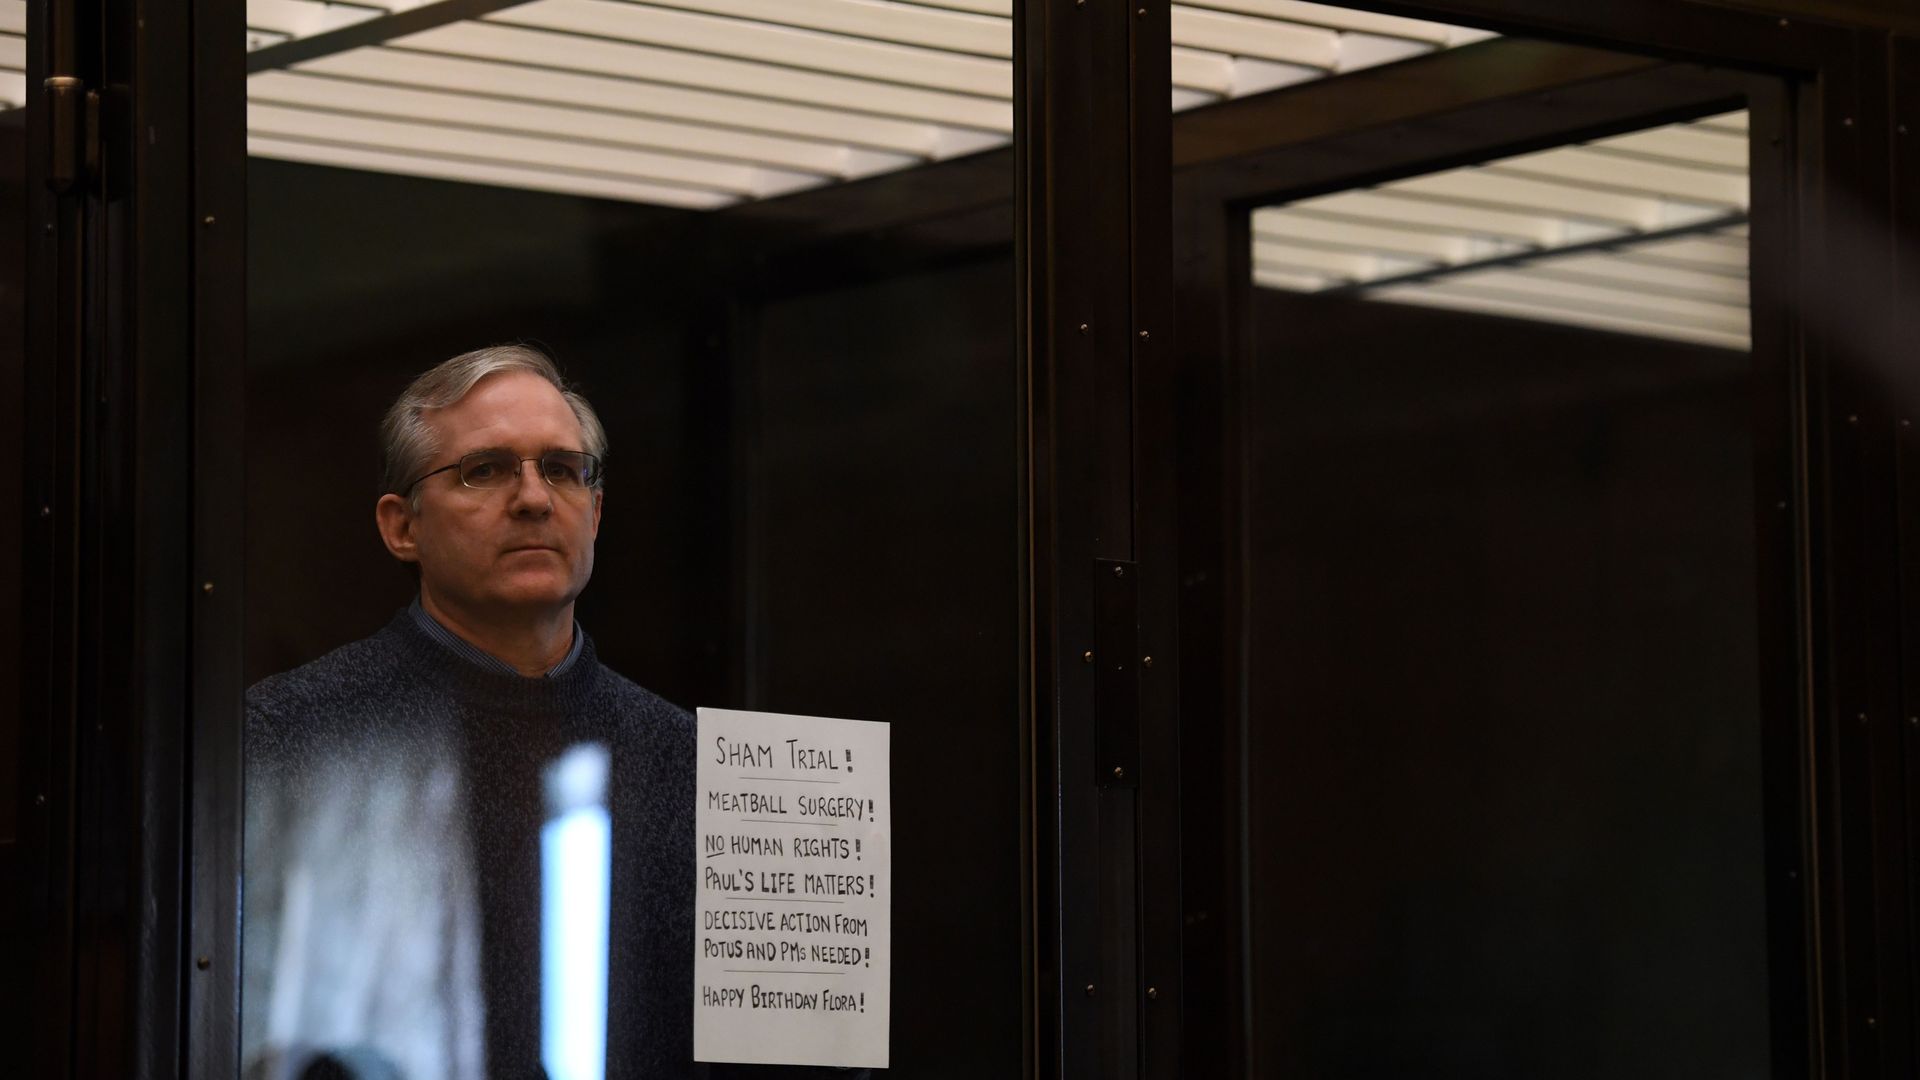 Paul Whelan, a former US marine who has been jailed in Russia since December 2018 on charges of espionage, in a defendants' cage in a Moscow courtroom in June 2020.